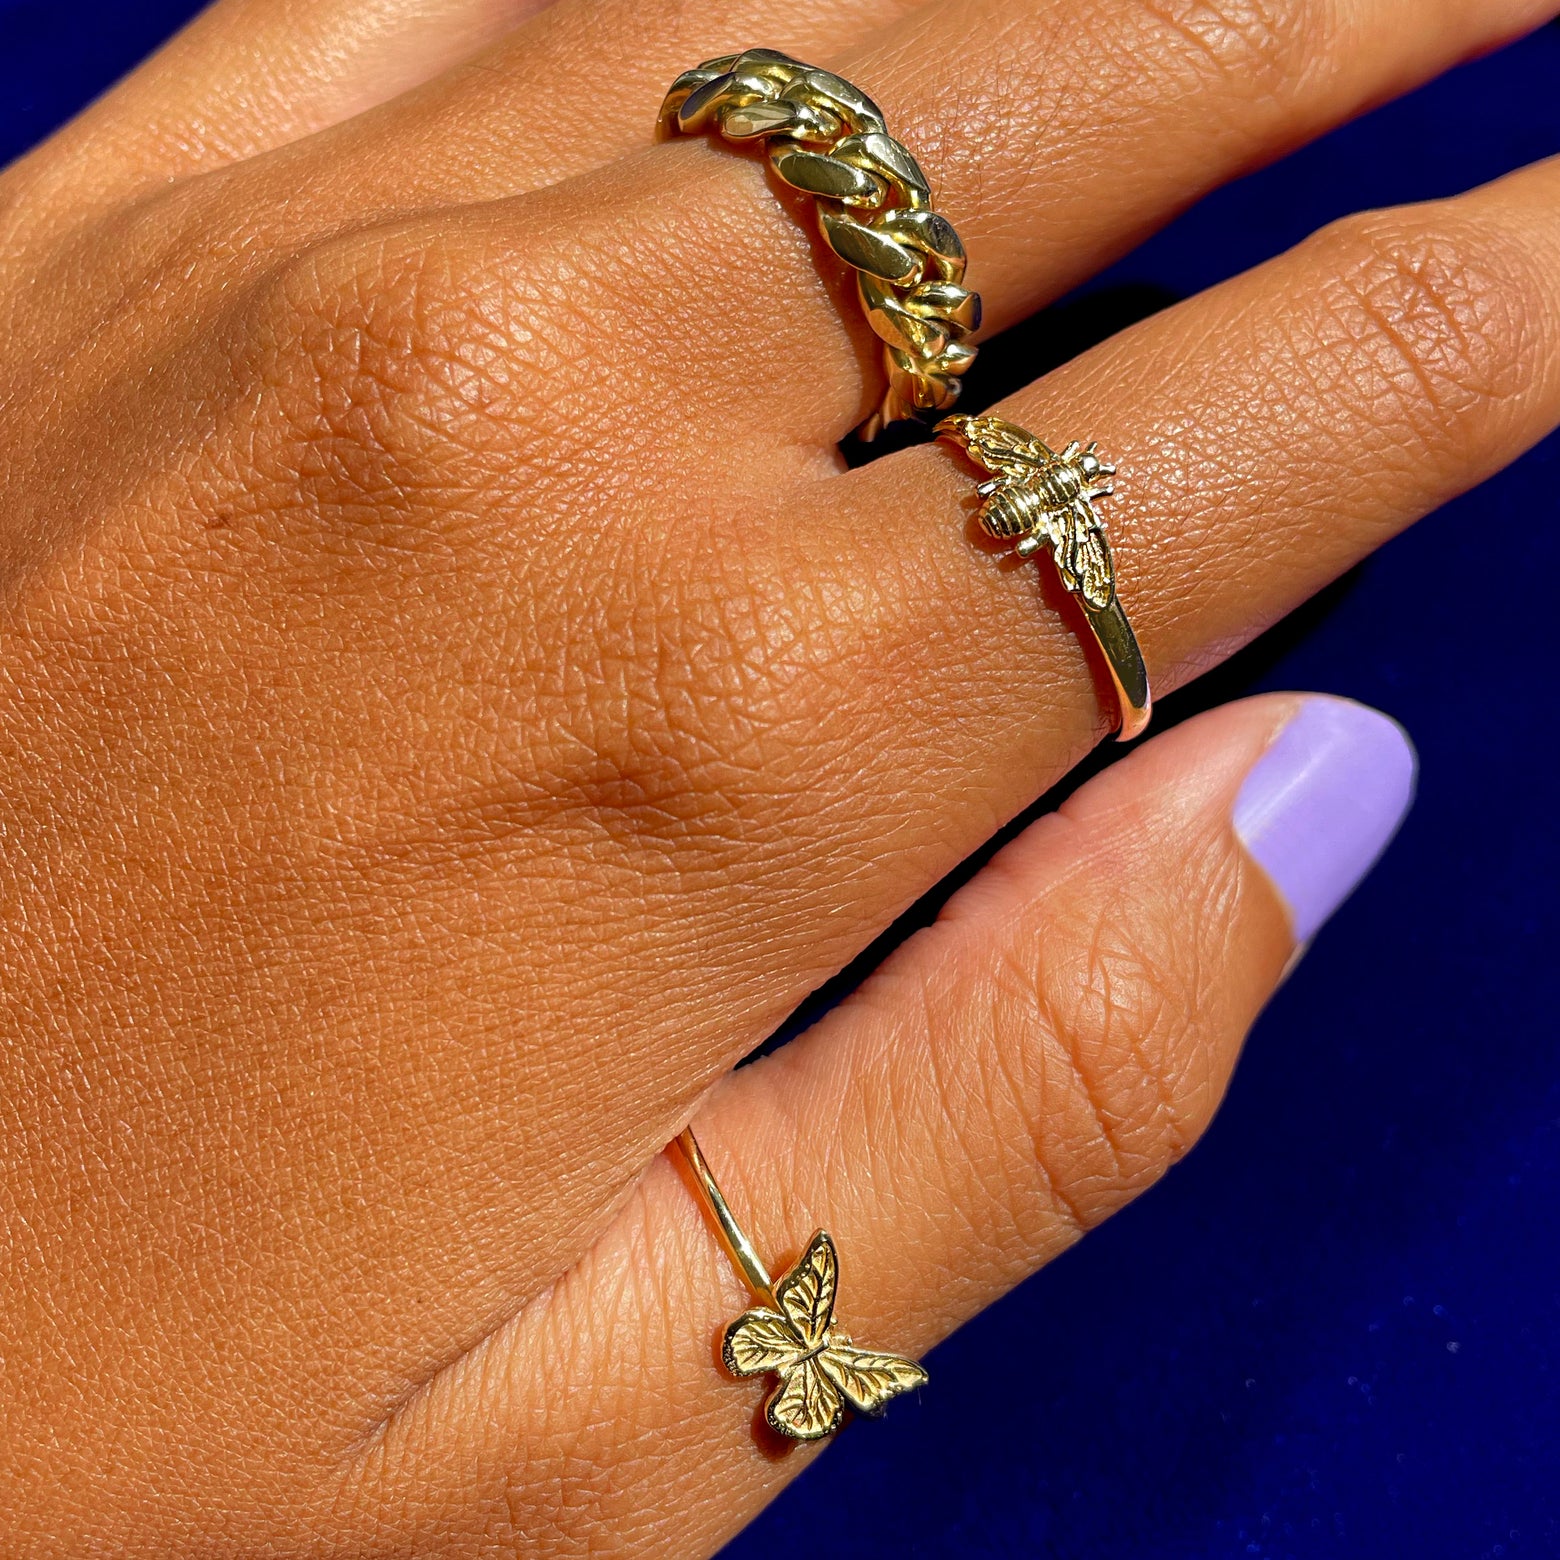 A hand with a Butterfly ring on the thumb, Curvy Bee Ring on the pointer finger, and a Miami Cuban Ring on the middle finger